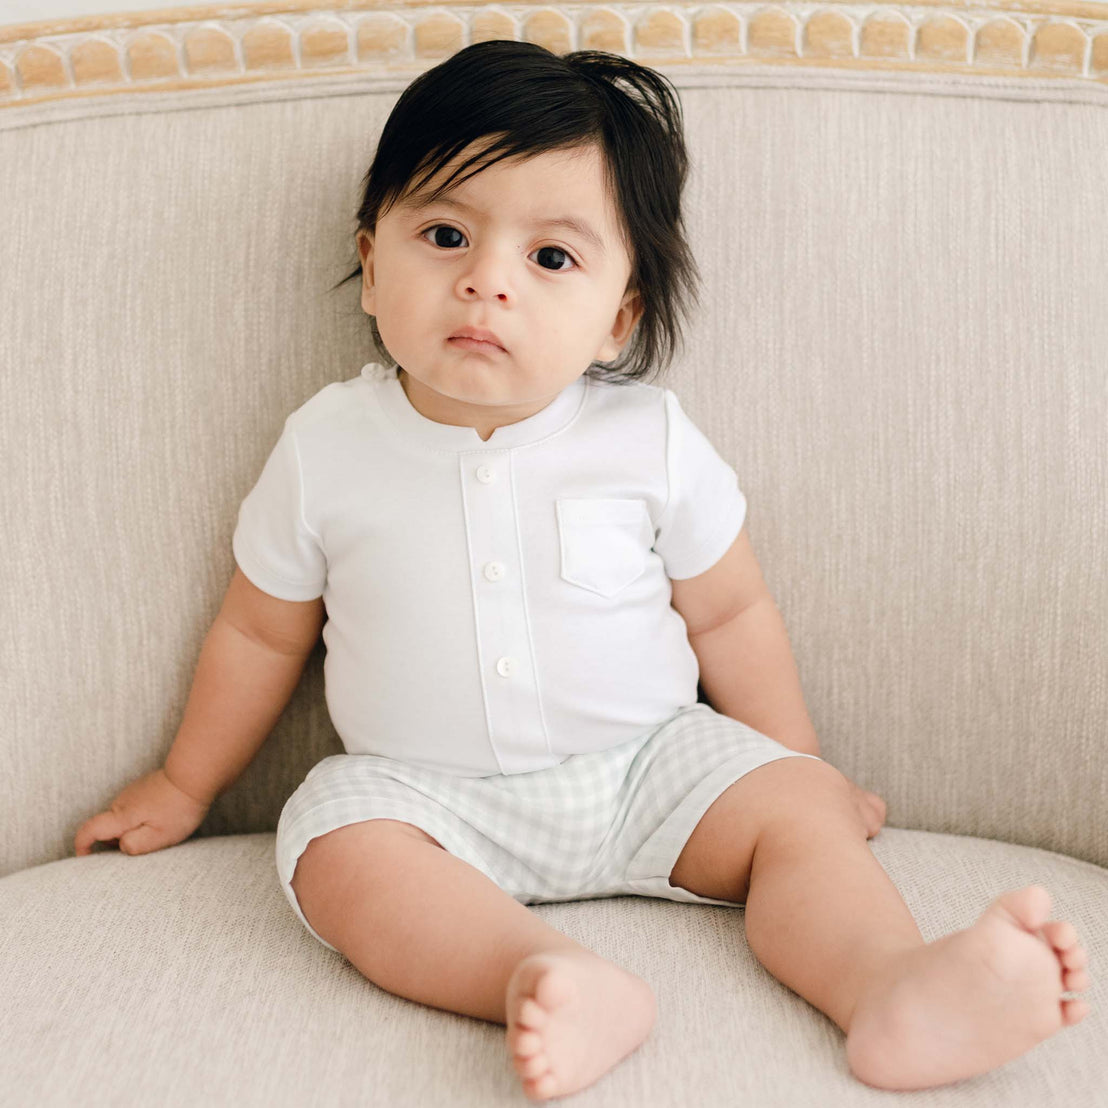 A baby with dark hair sits on a beige sofa, wearing the Ian Cloud Shorts Set, looking directly at the camera with a serious expression.